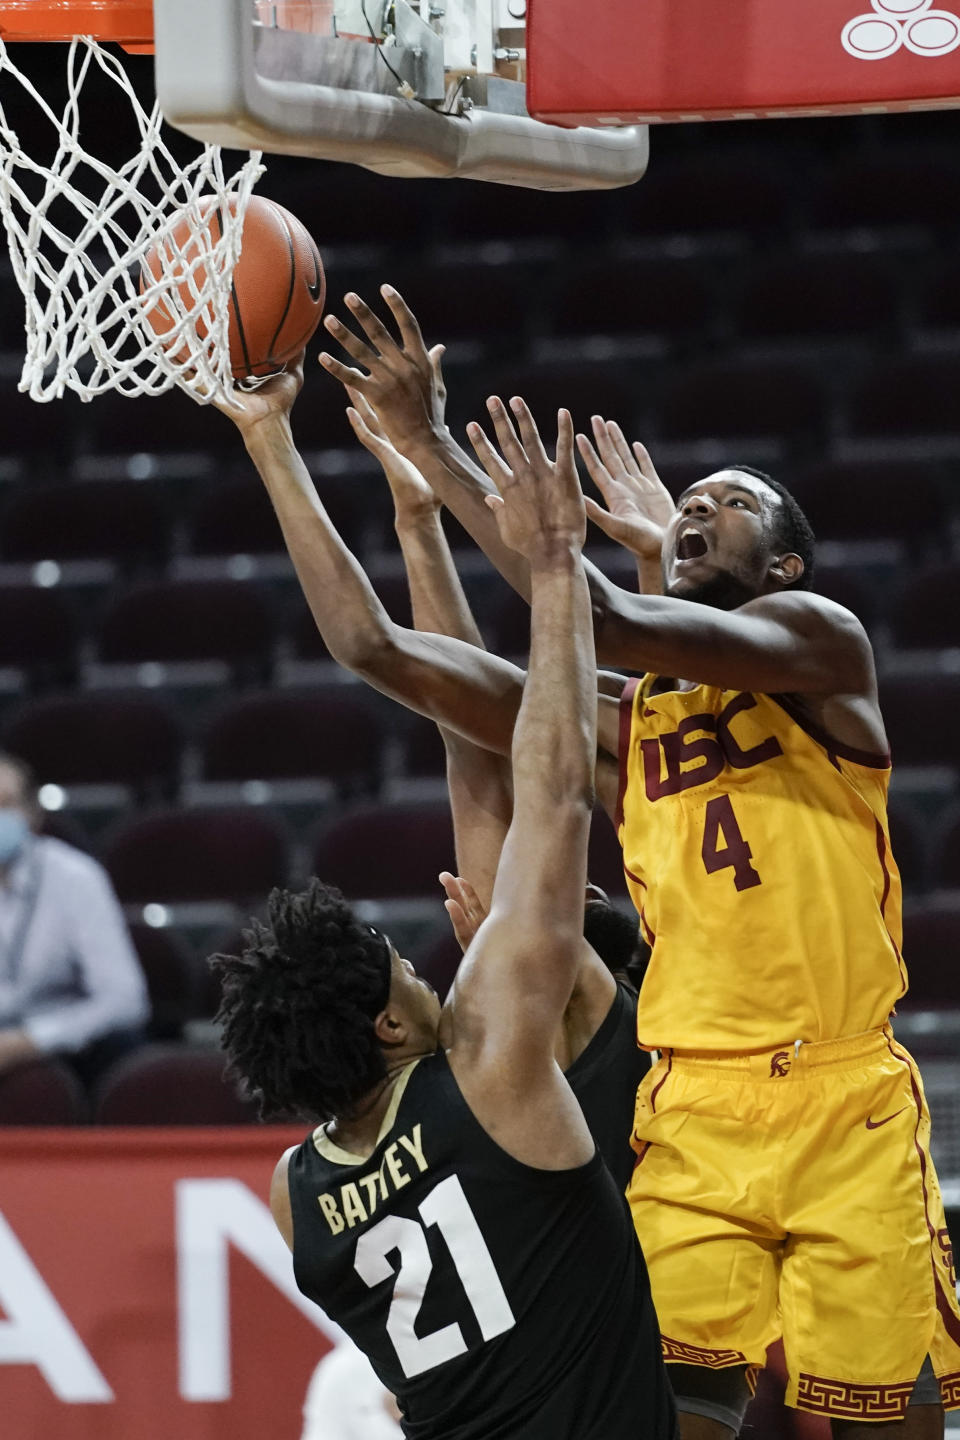 Southern California's Evan Mobley, right, shoots over Colorado's Evan Battey during the second half of an NCAA college basketball game, Thursday, Dec. 31, 2020, in Los Angeles. Colorado won 72-62. (AP Photo/Jae C. Hong)